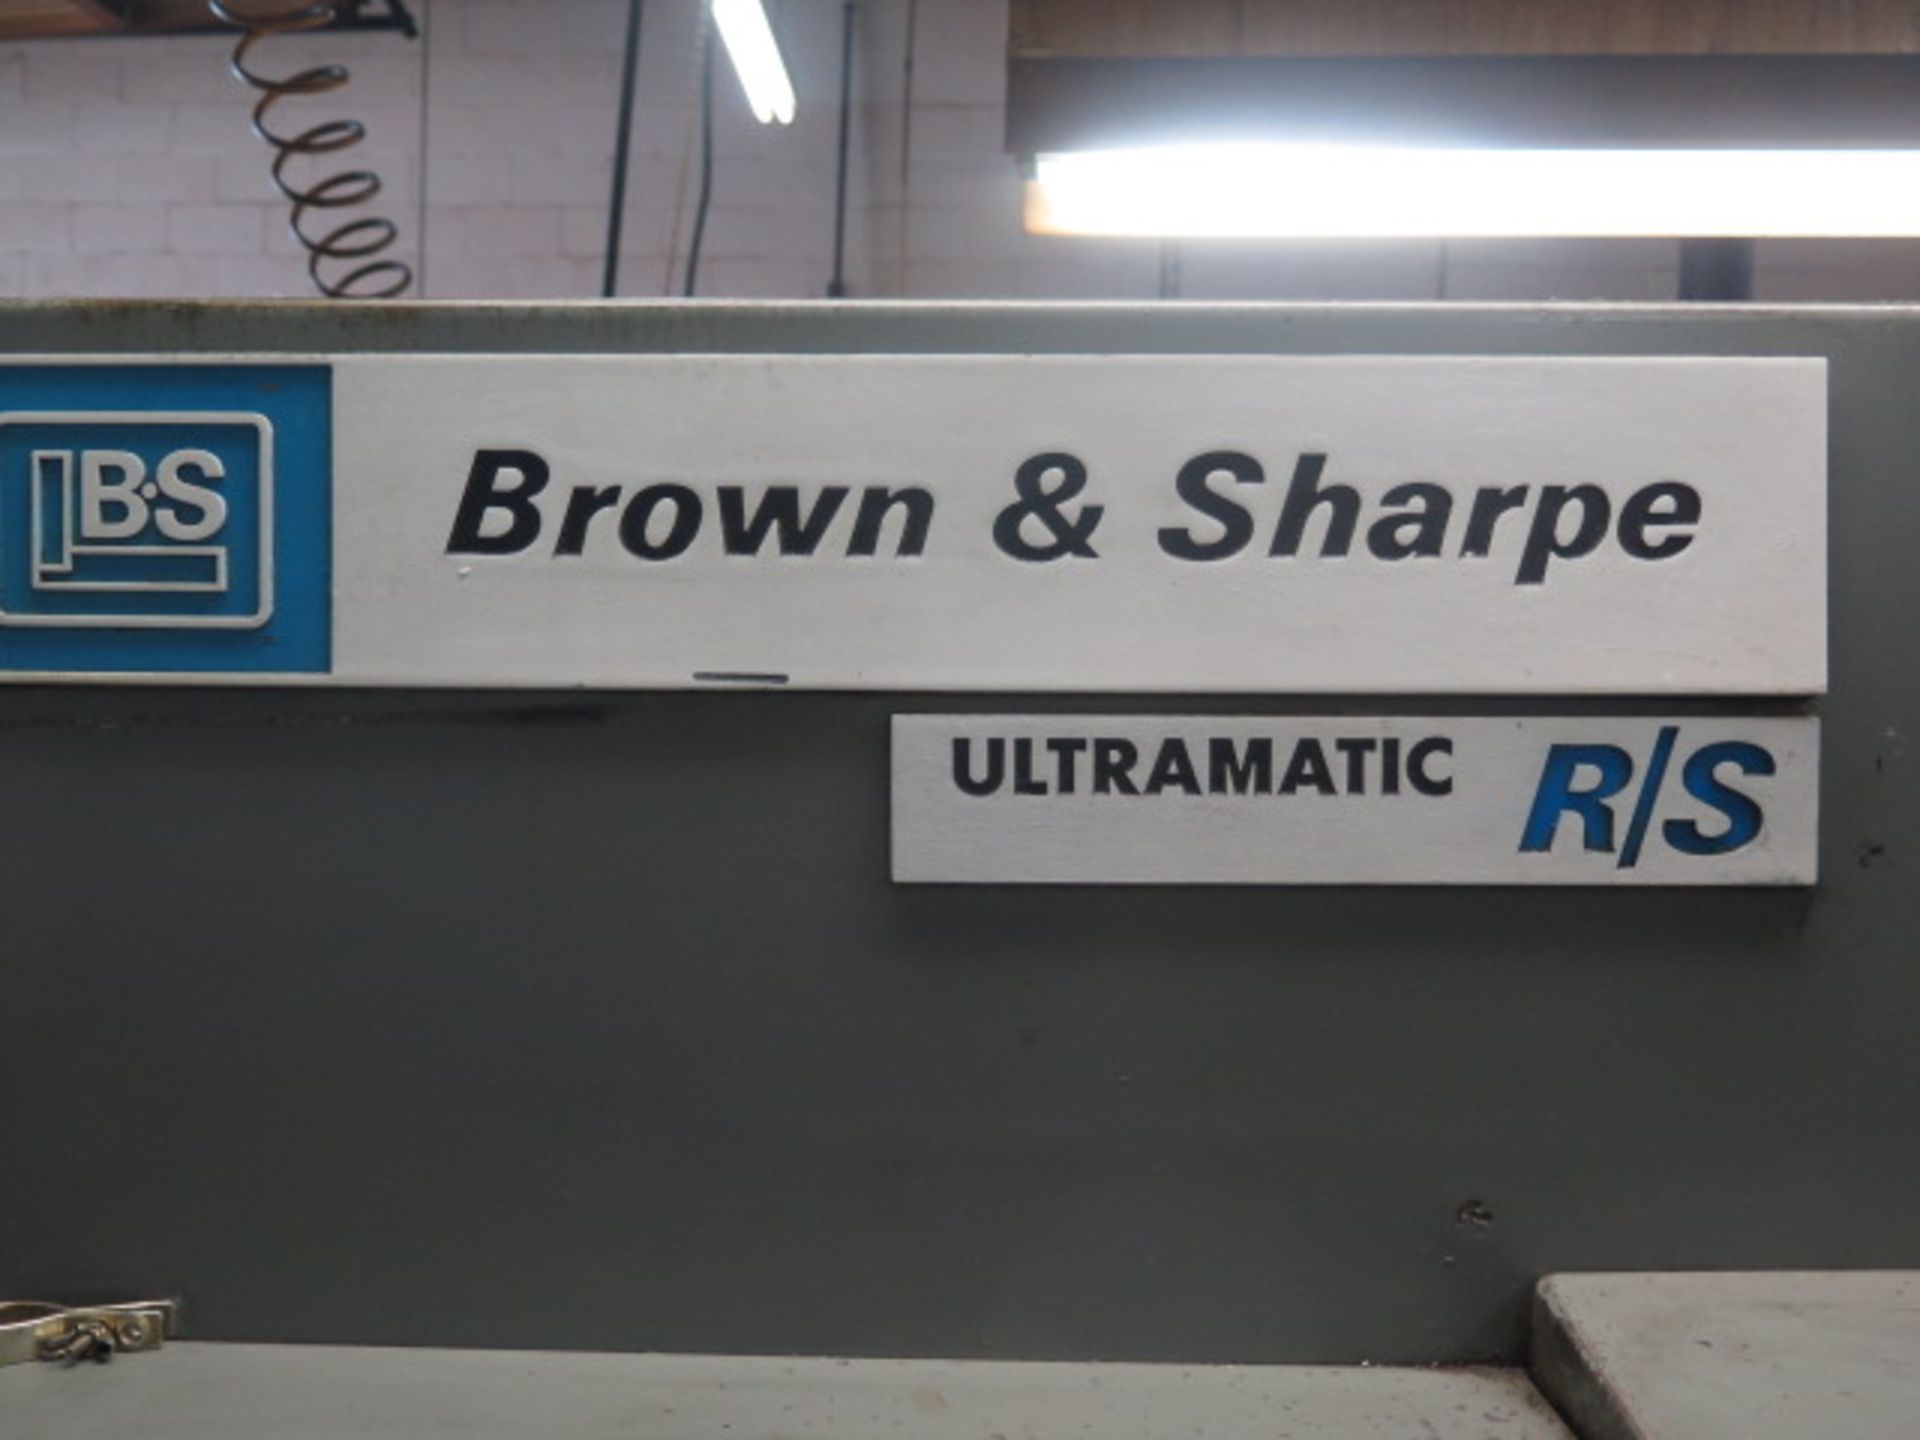 Brown & Sharpe Ultramatic R/S ¾” Cap Automatic Screw Machine s/n 542-00-9363-3/4 w/ 6-Station - Image 8 of 9